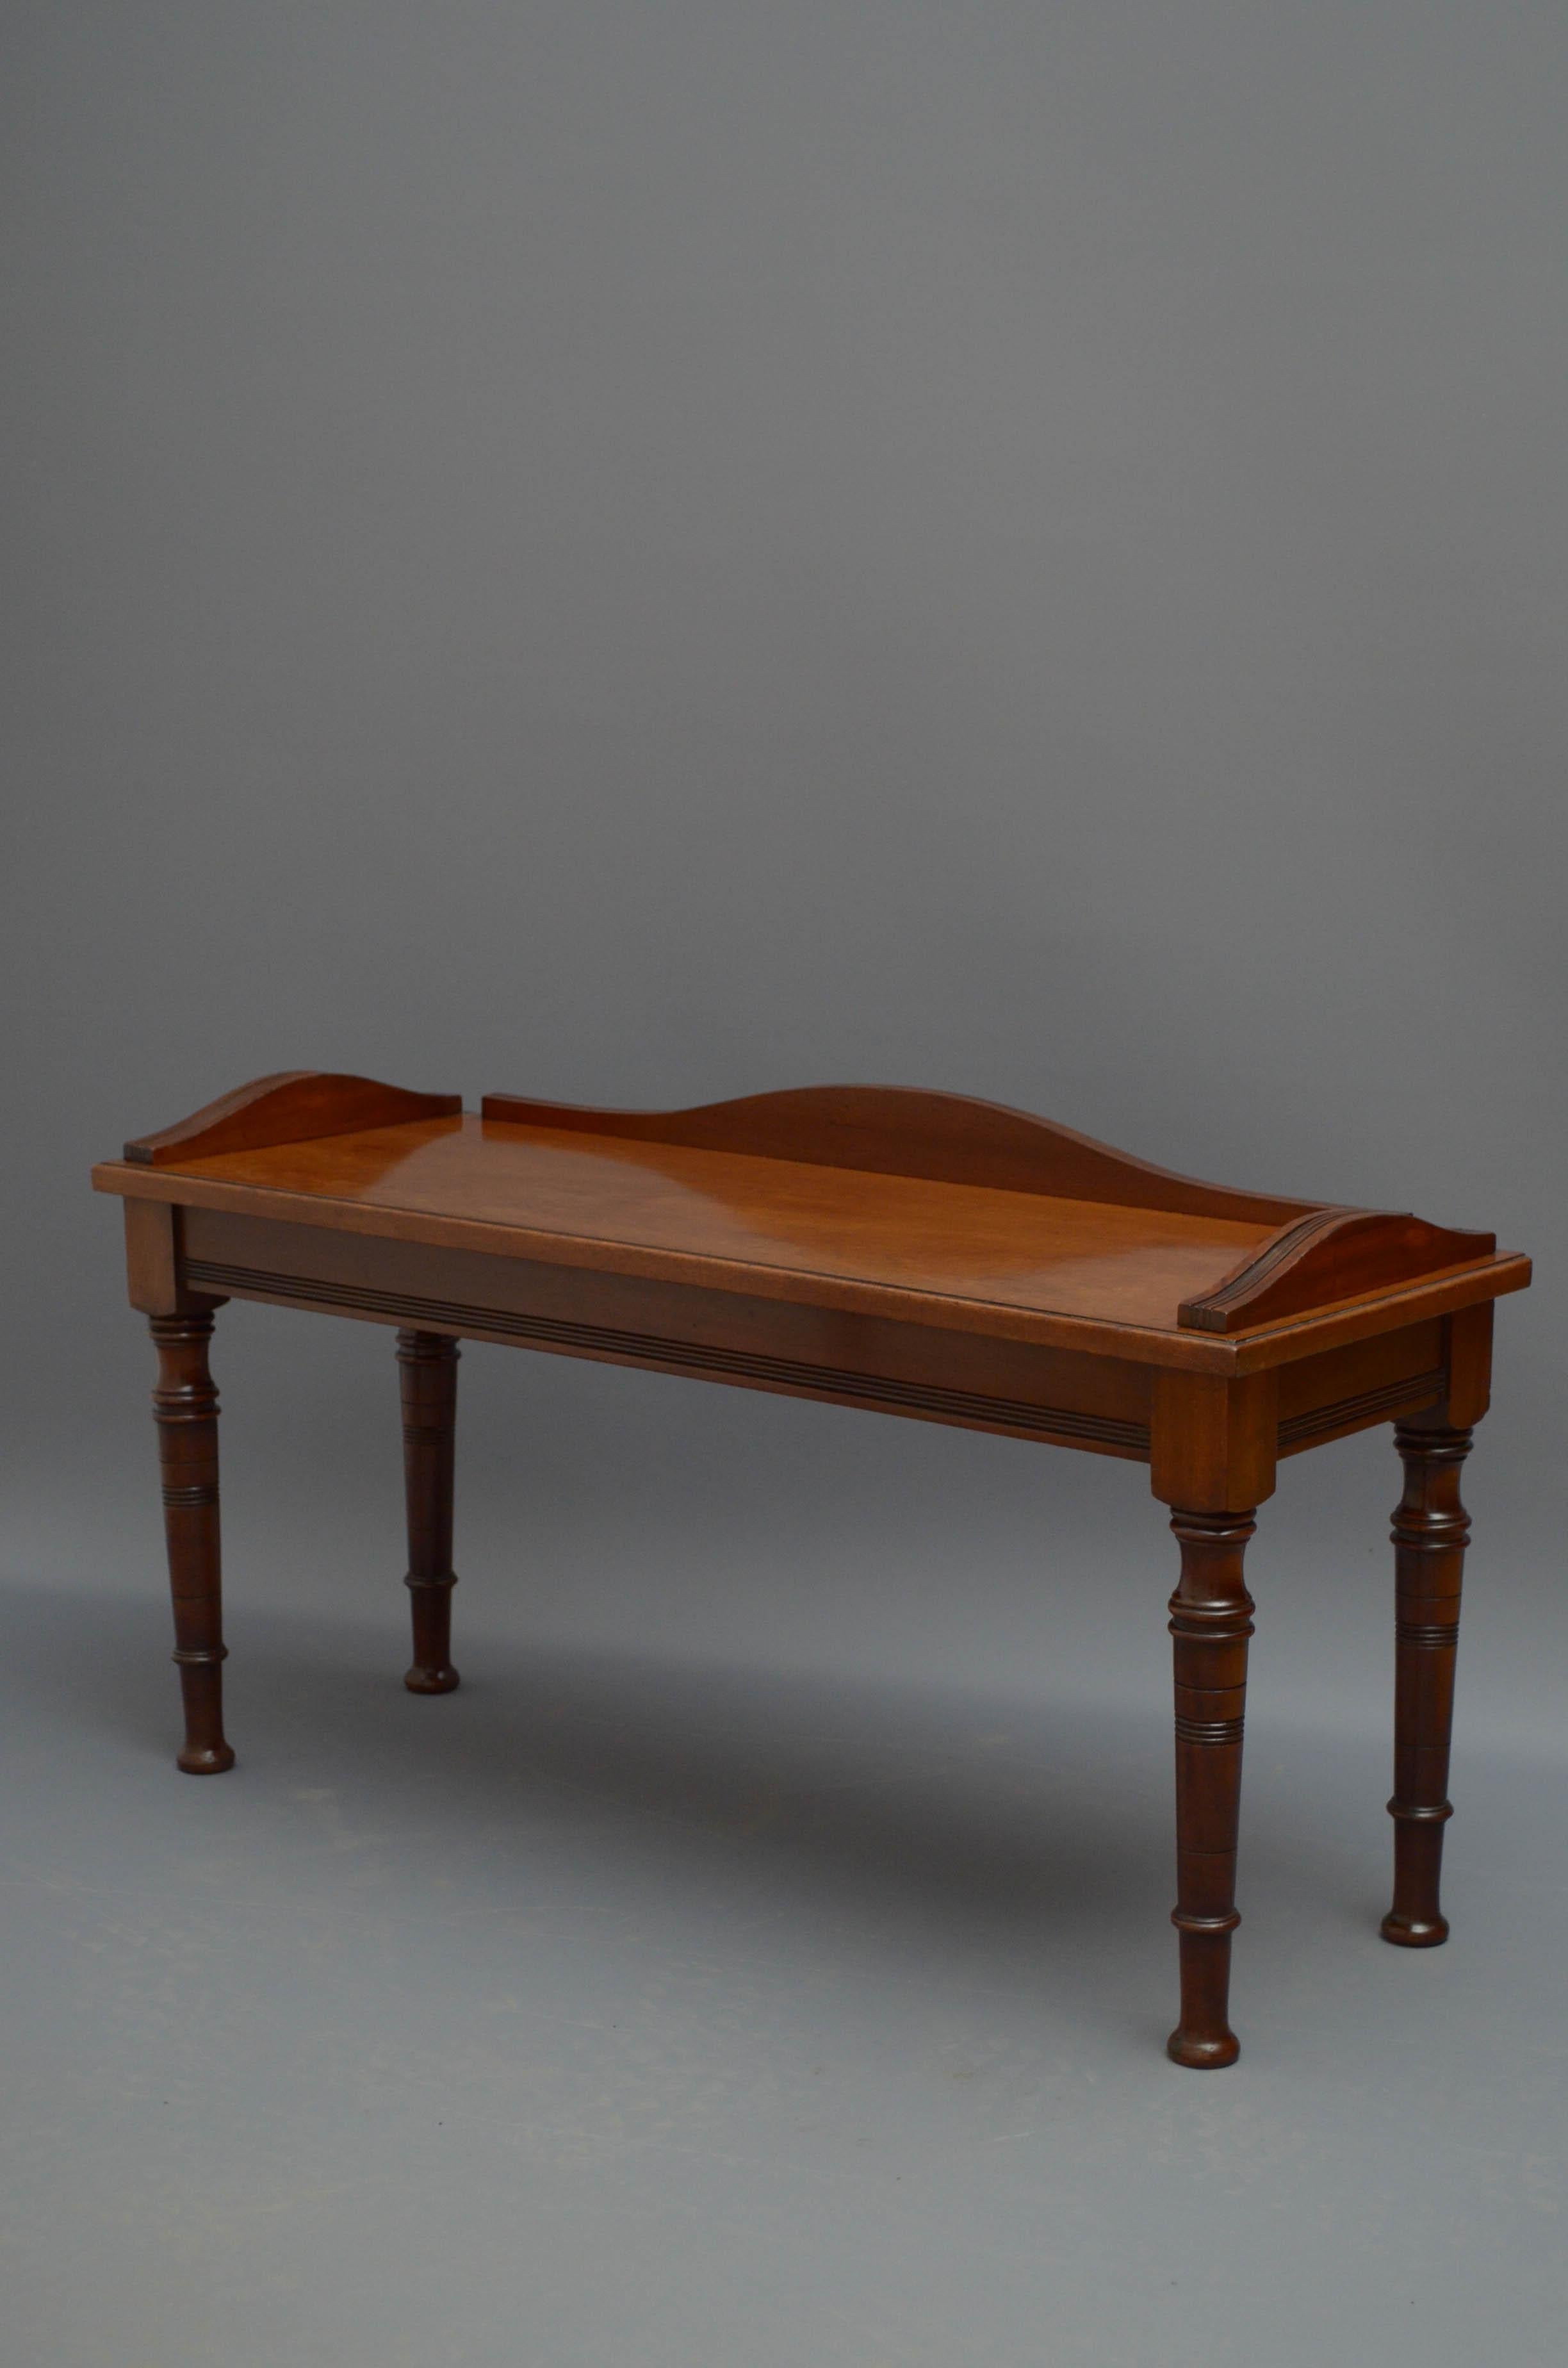 Stylish Edwardian hall bench in figured walnut, having shaped and reeded upstand to back and sides, figured walnut seat and reeded frieze, standing on turned and ringed legs. This antique bench retains its original finish, patina and mellow colour,